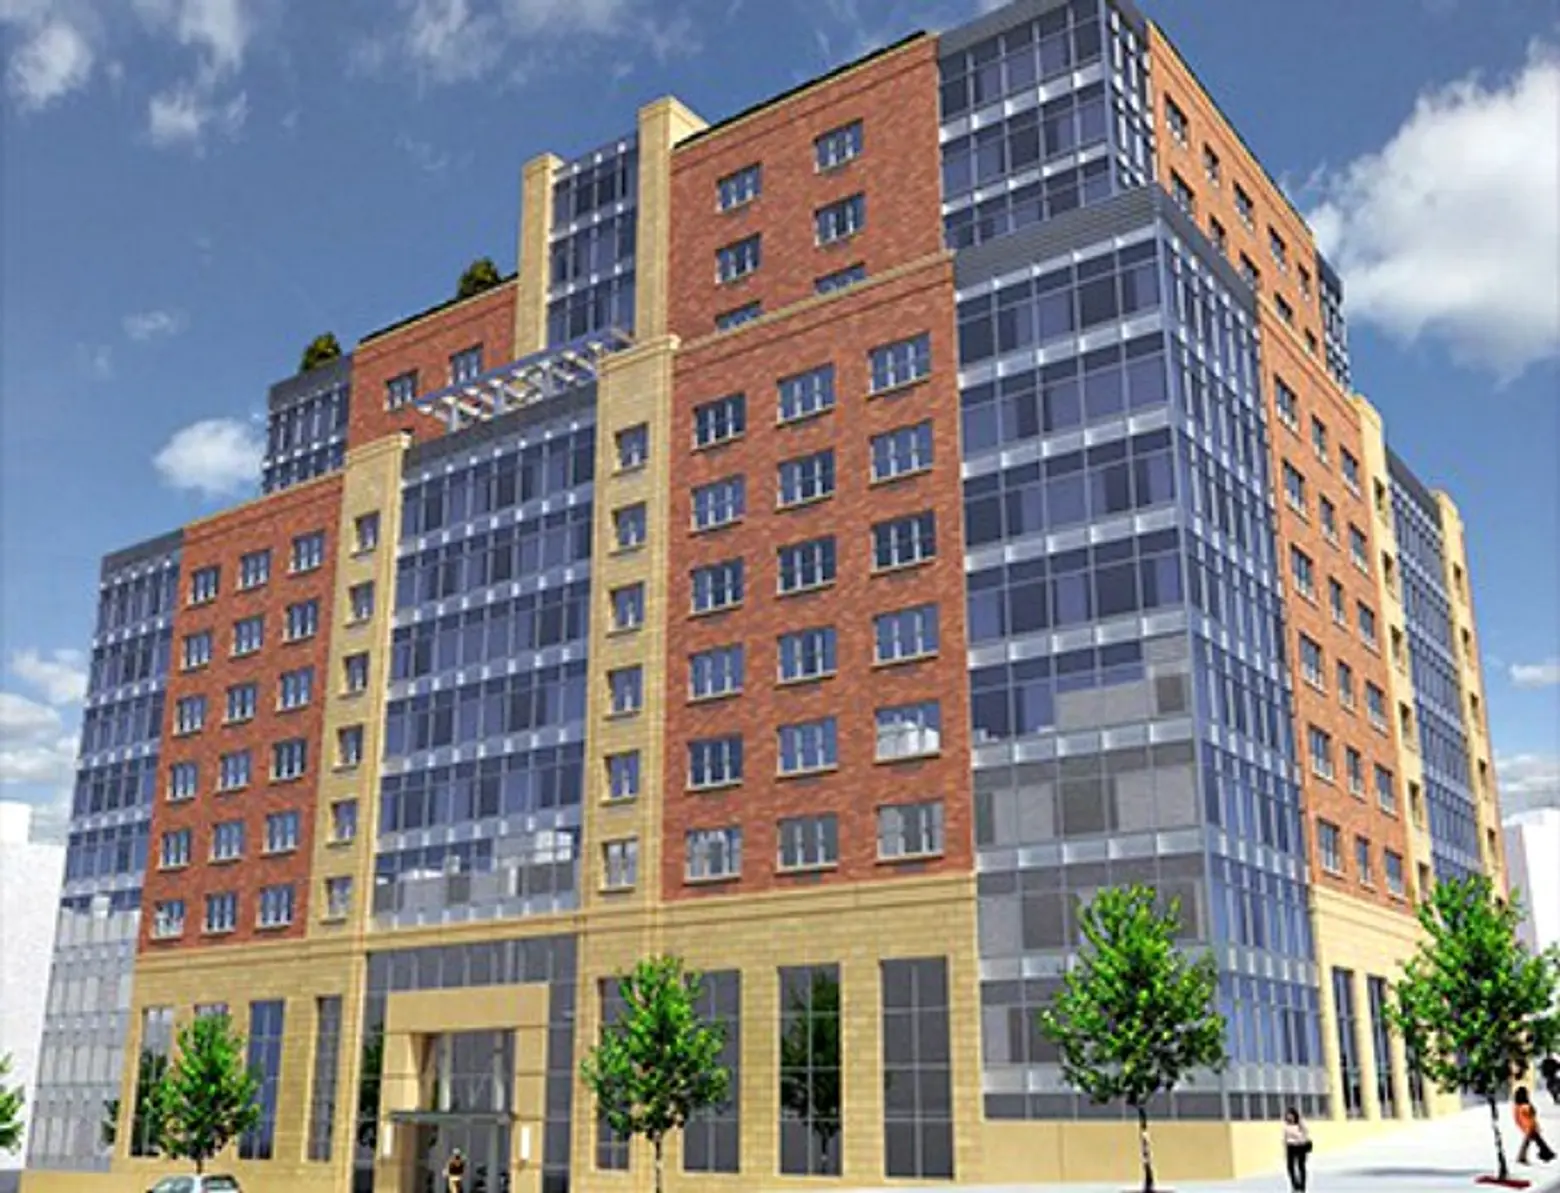 151 Affordable Apartments Up For Grabs Near Yankee Stadium, Starting at $532/Month